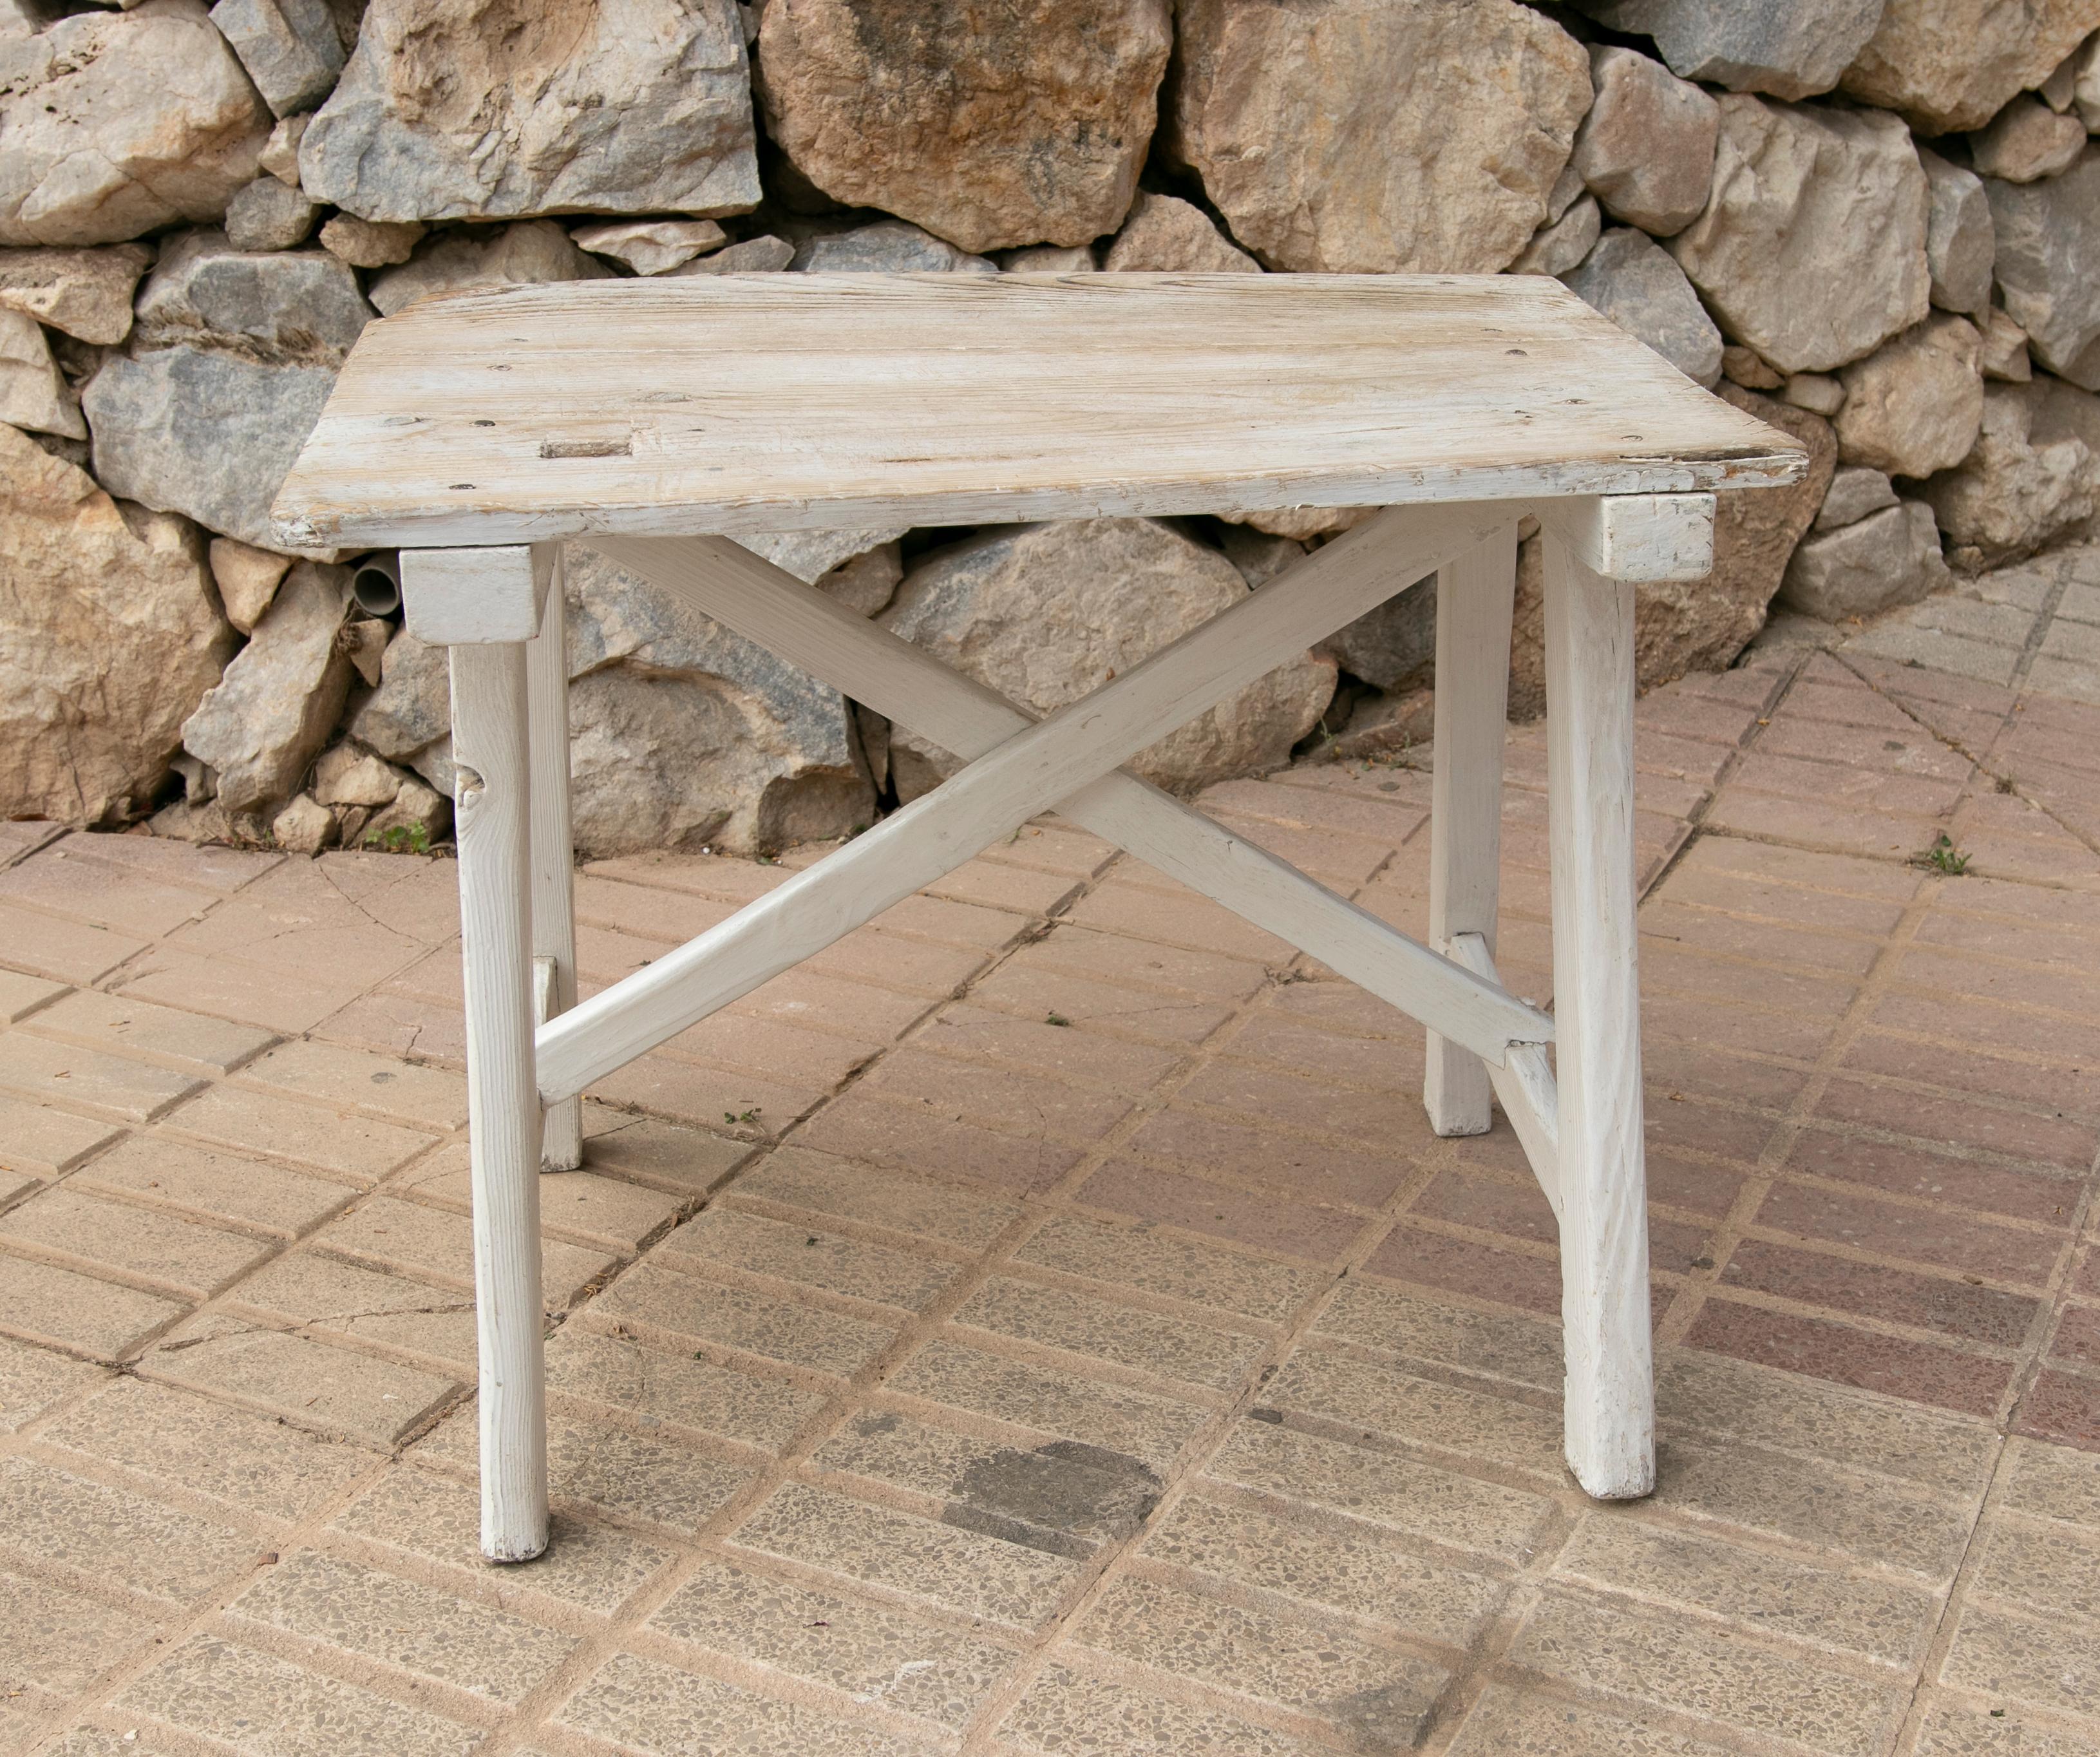 Spanish Country side table made of white painted wood.